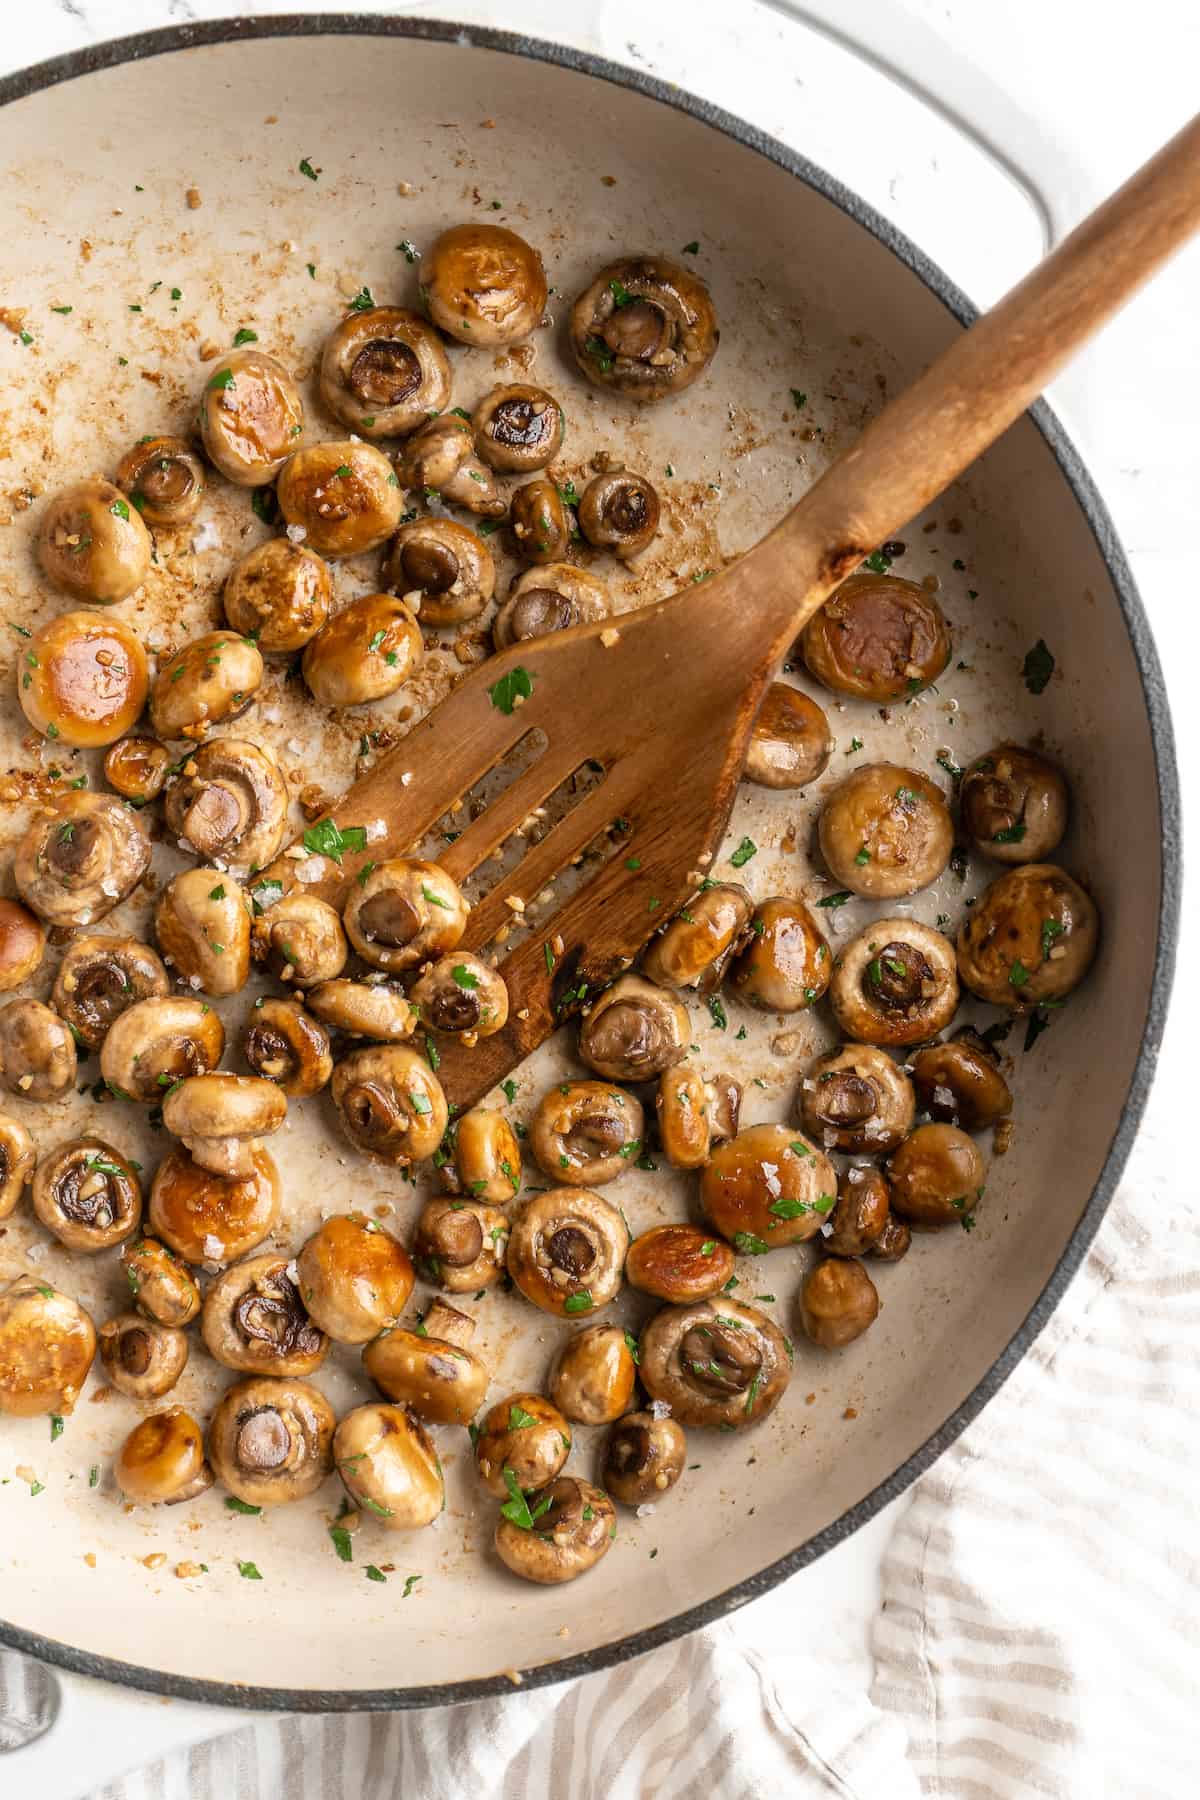 Overhead view of garlic mushrooms in skillet with spatula